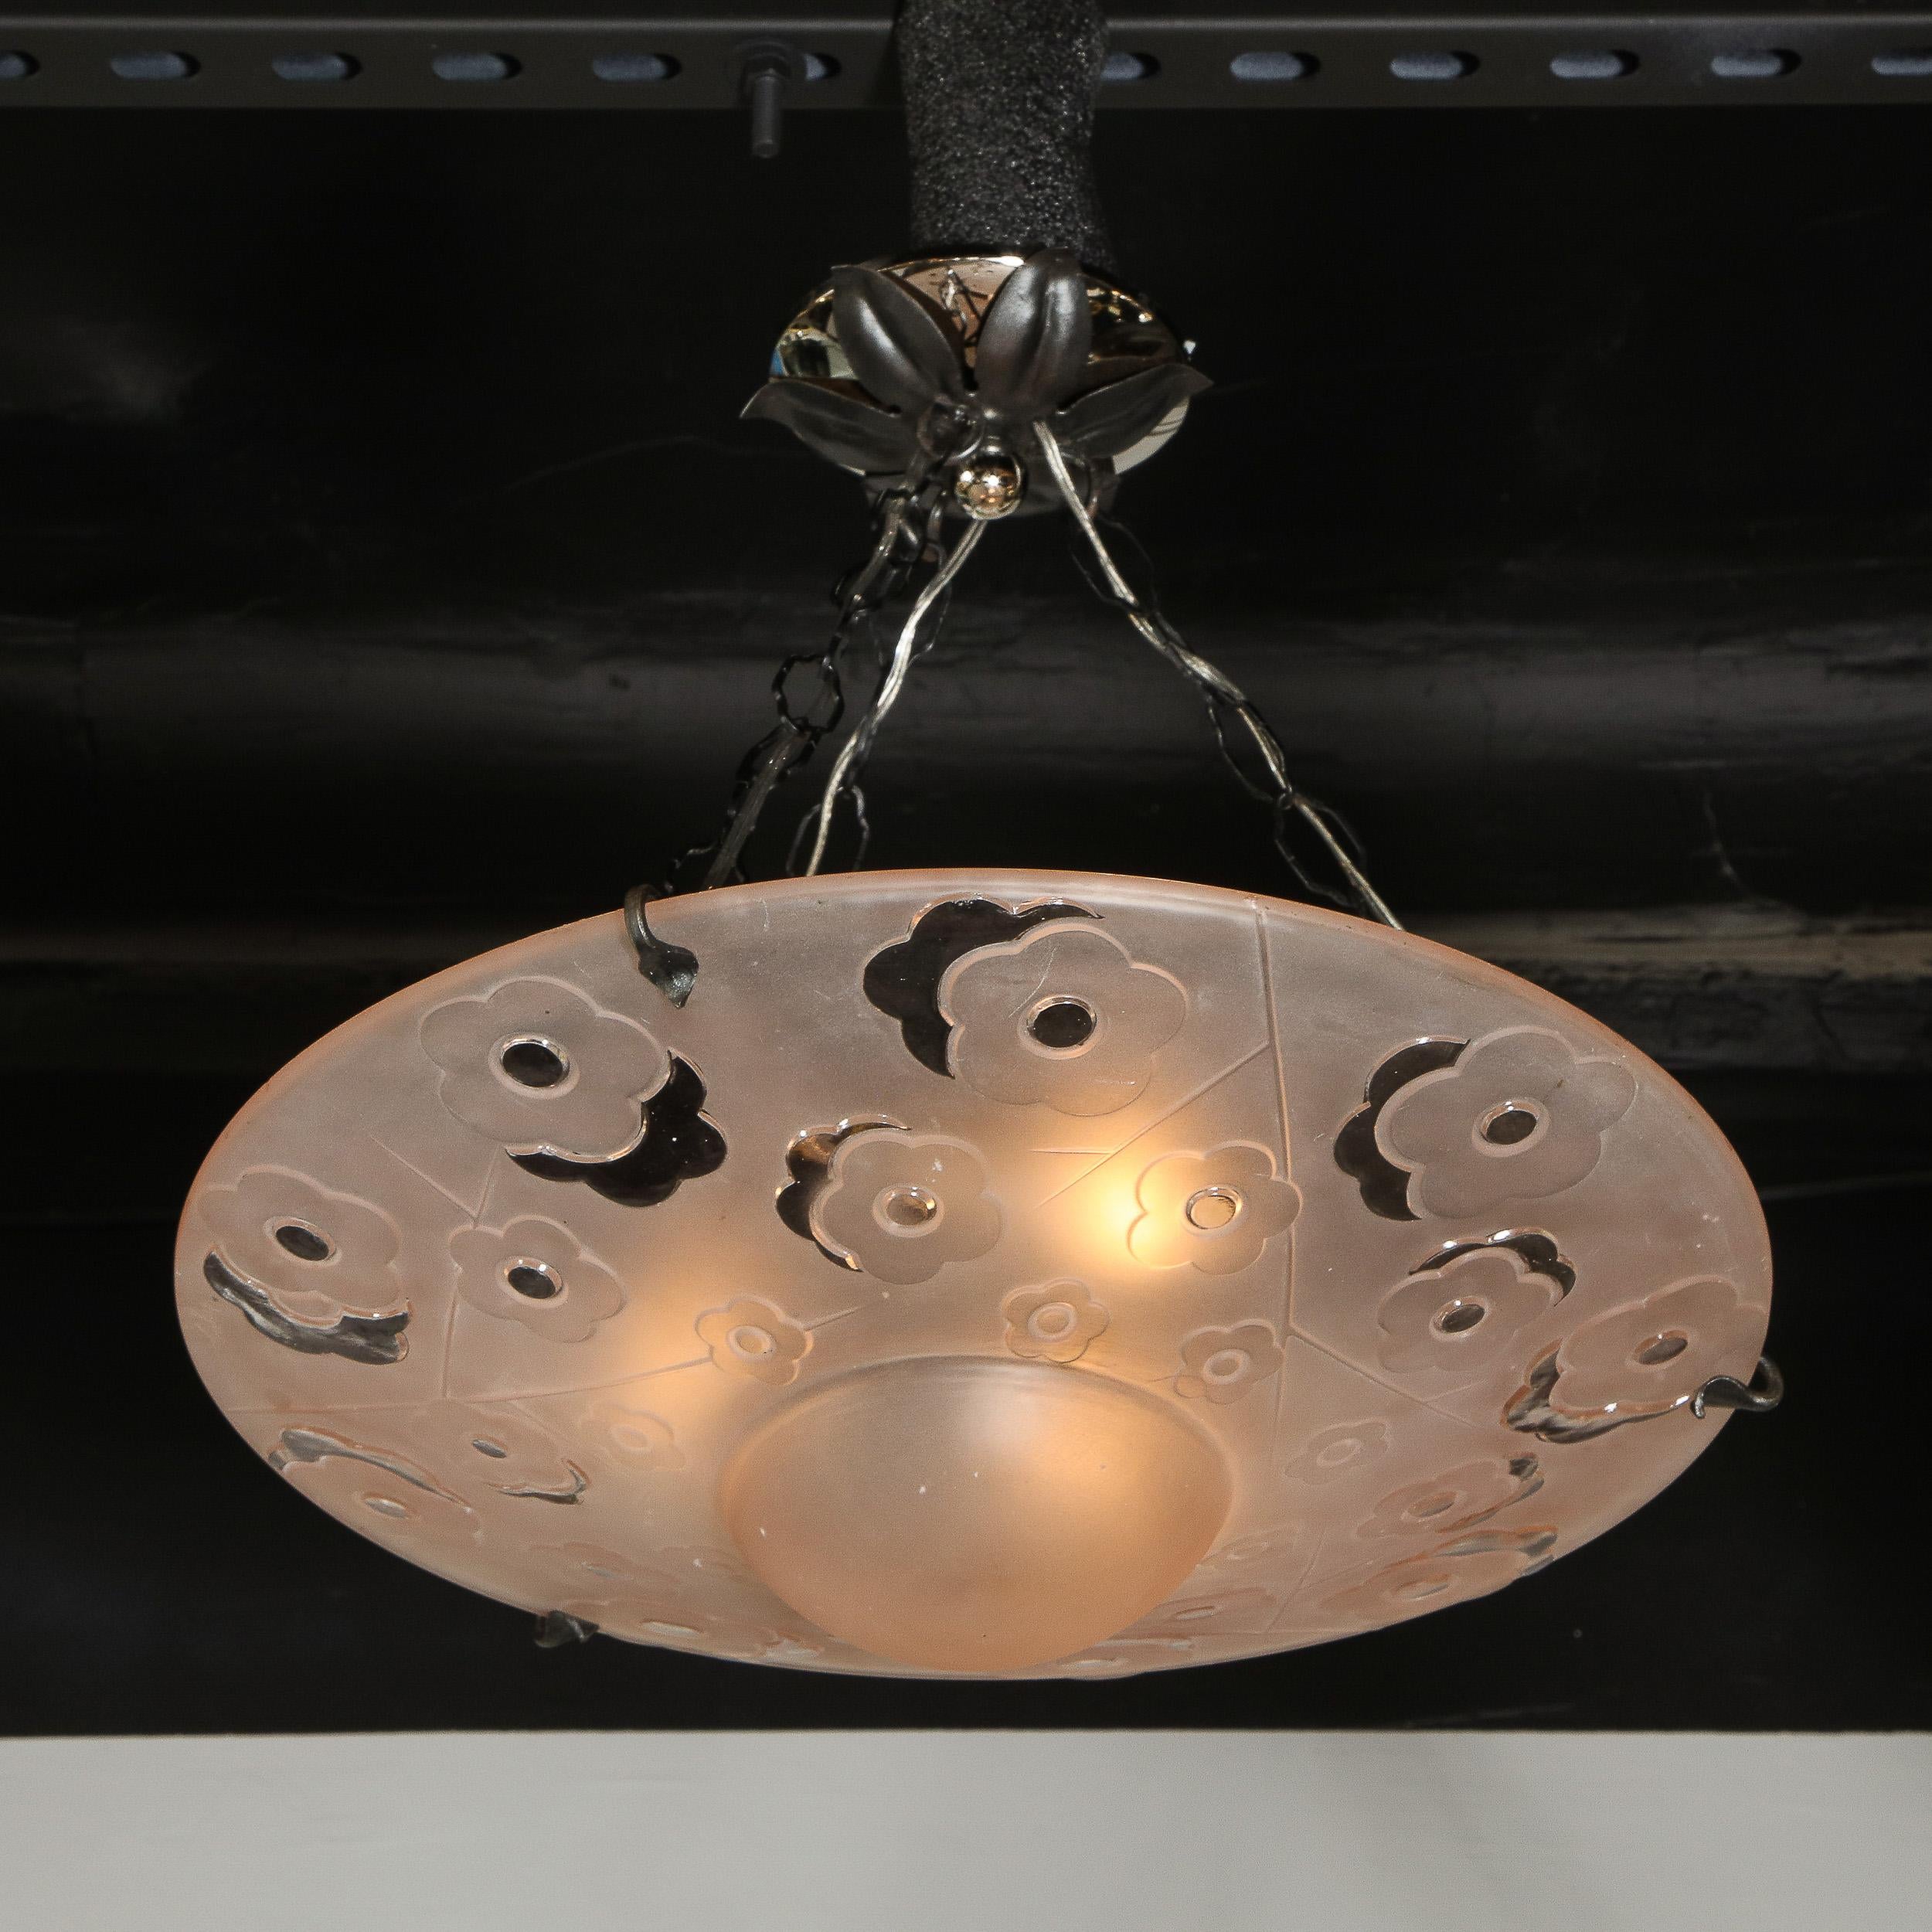 This stunning signed Degué Art Deco chandelier was realized in France circa 1930. It features a circular slighly convex body with a domed body in frosted rose colored glass with cubist floral motifs (resembling stylized cherry blossoms) etched in